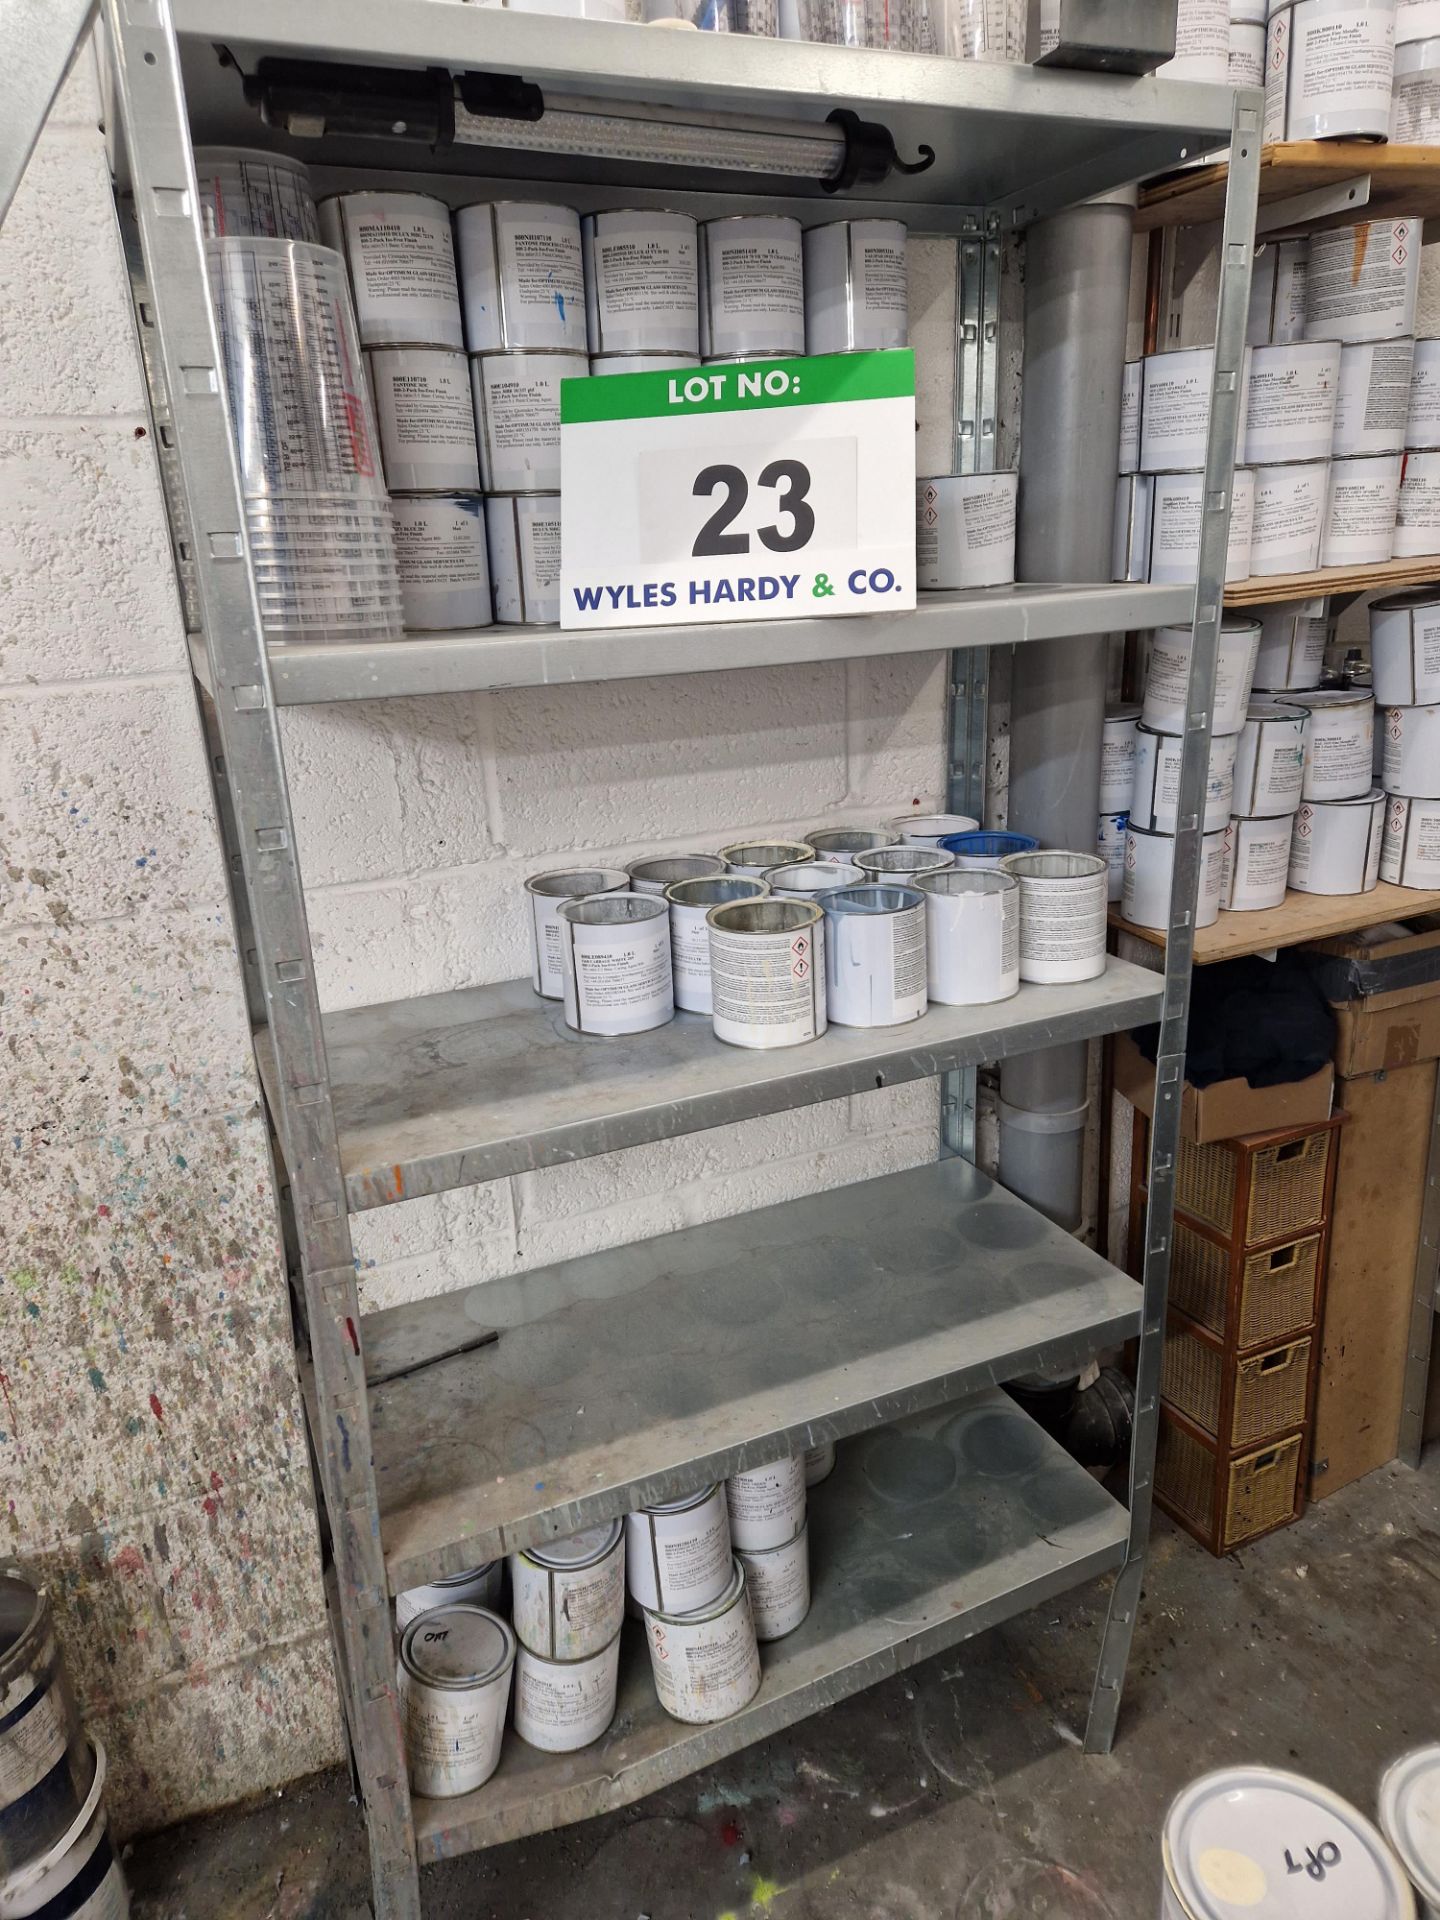 Three Bays 5-Tier Galvanised Steel Parts Racks (N.B. Contents Not Included) - Image 2 of 3